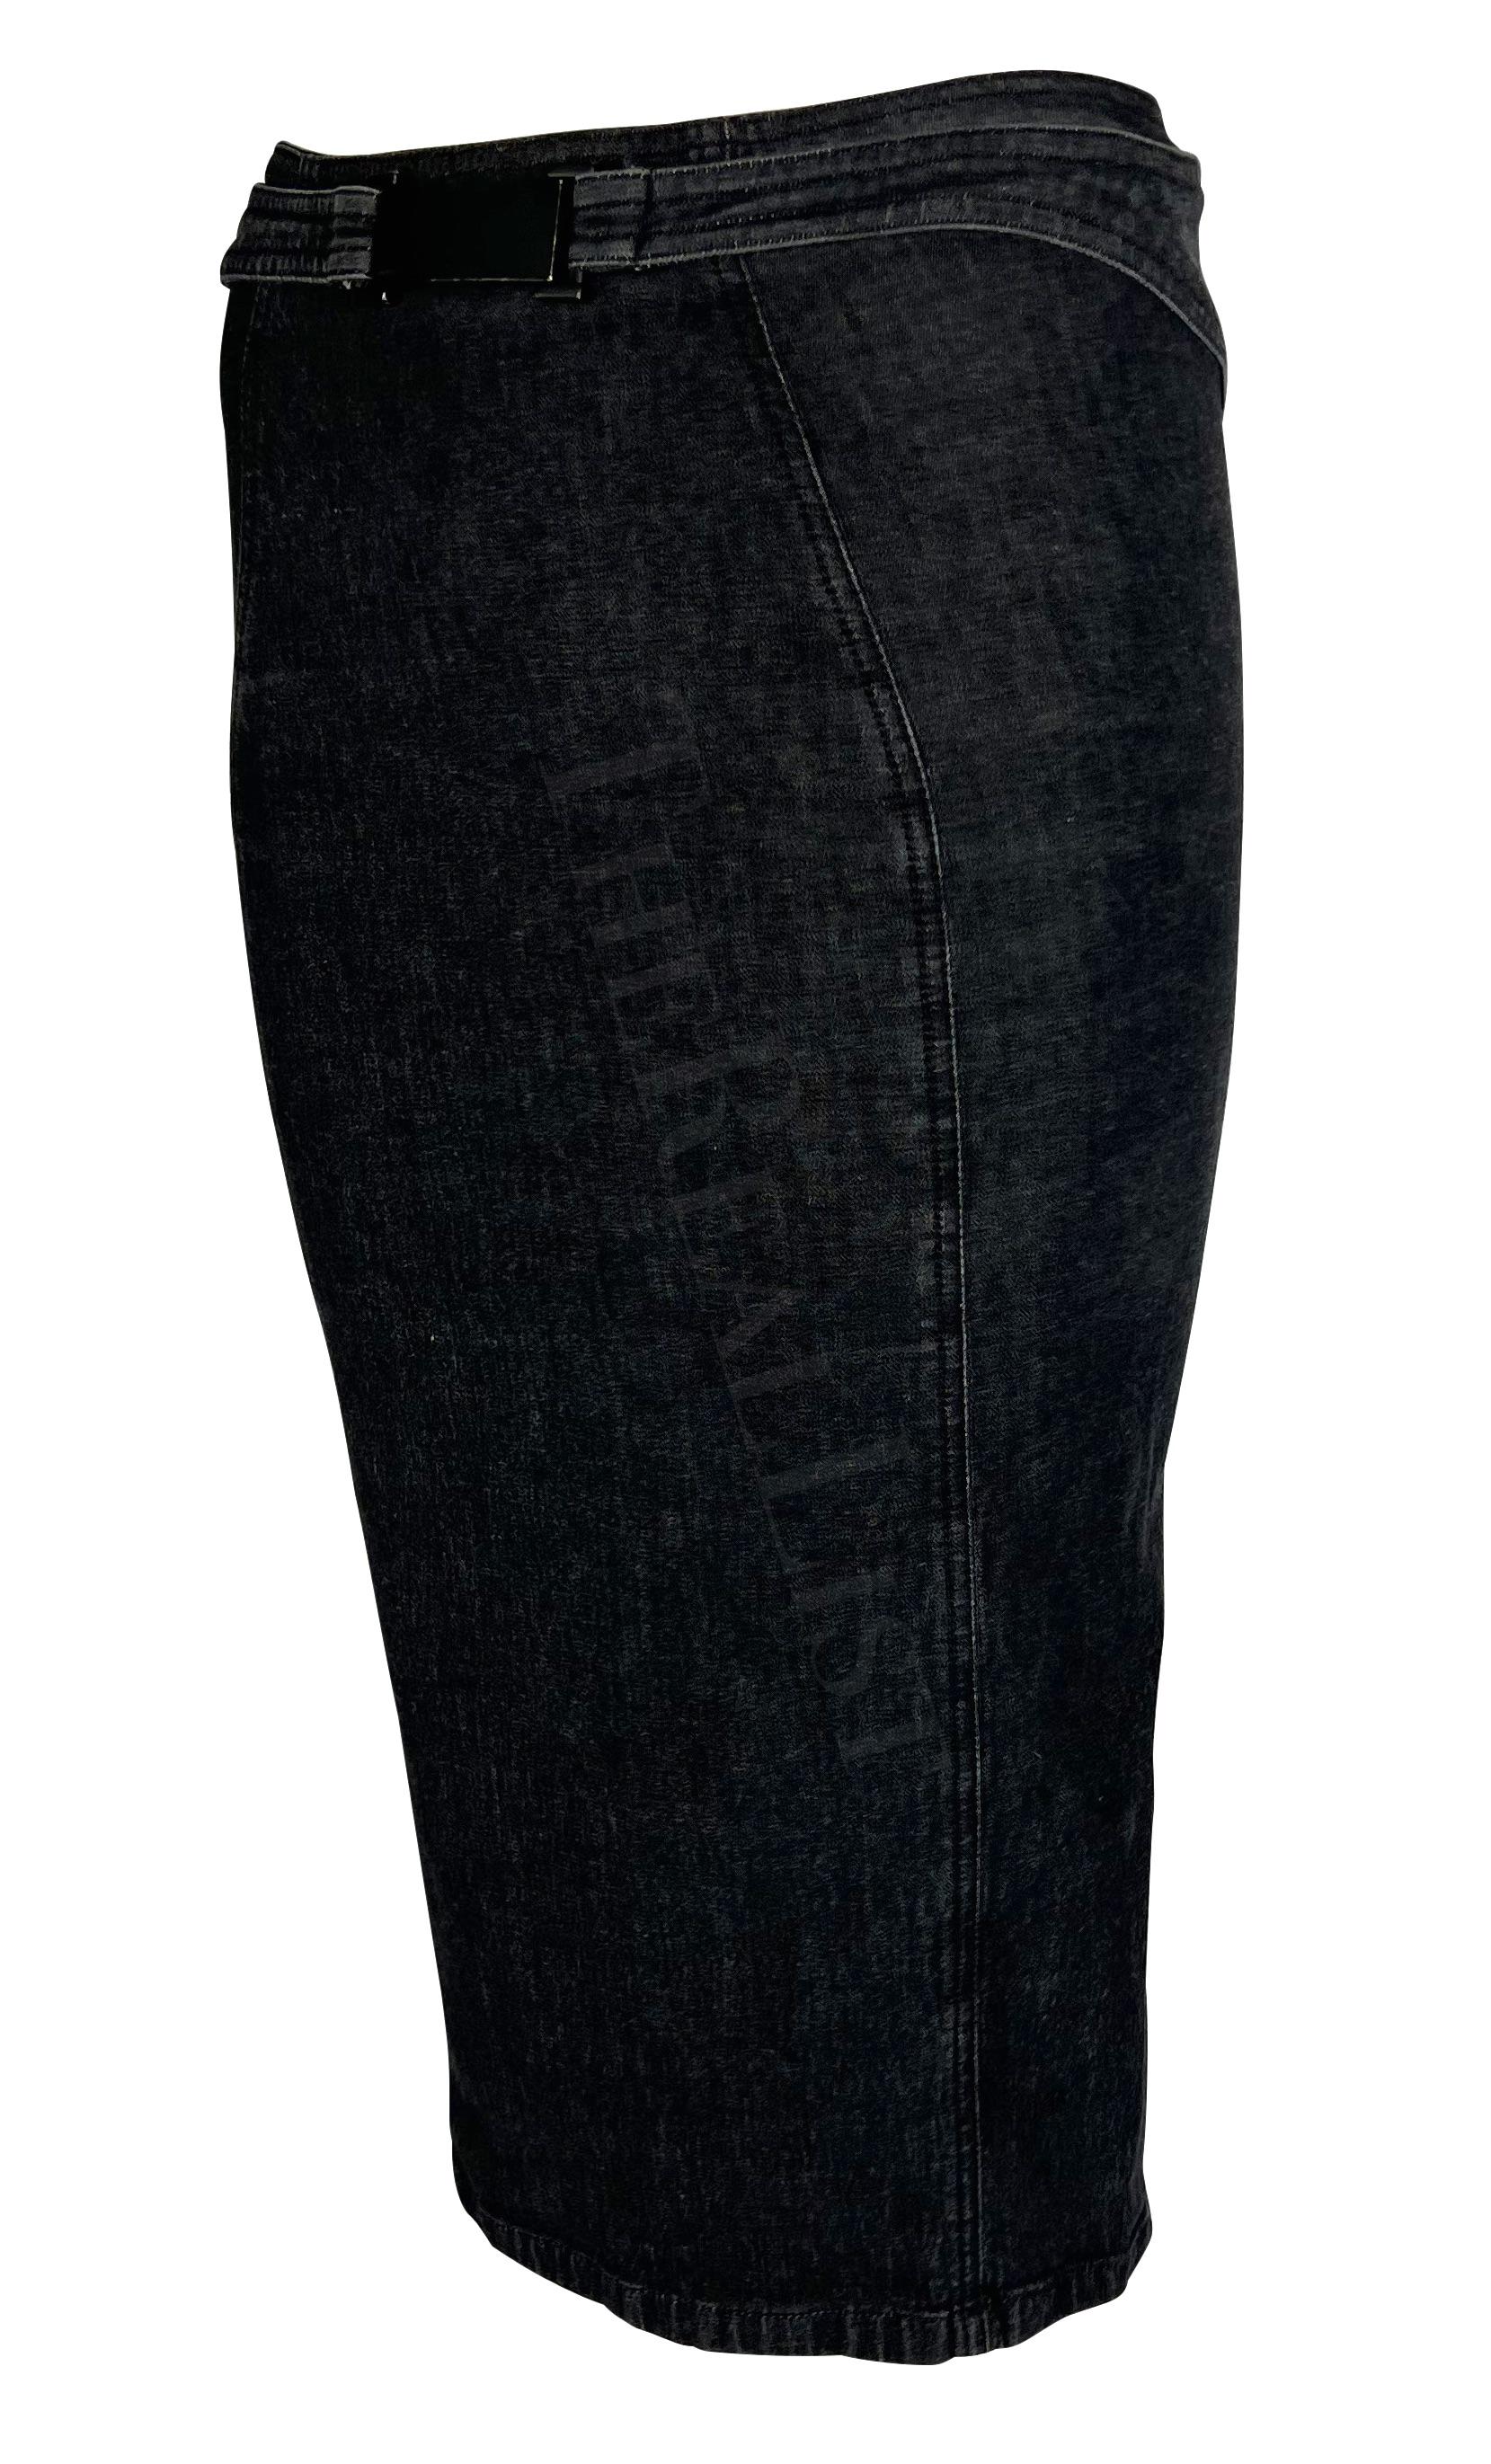 2001 Gucci by Tom Ford Dark Wash Denim Skirt with Metal Buckle In Good Condition For Sale In West Hollywood, CA